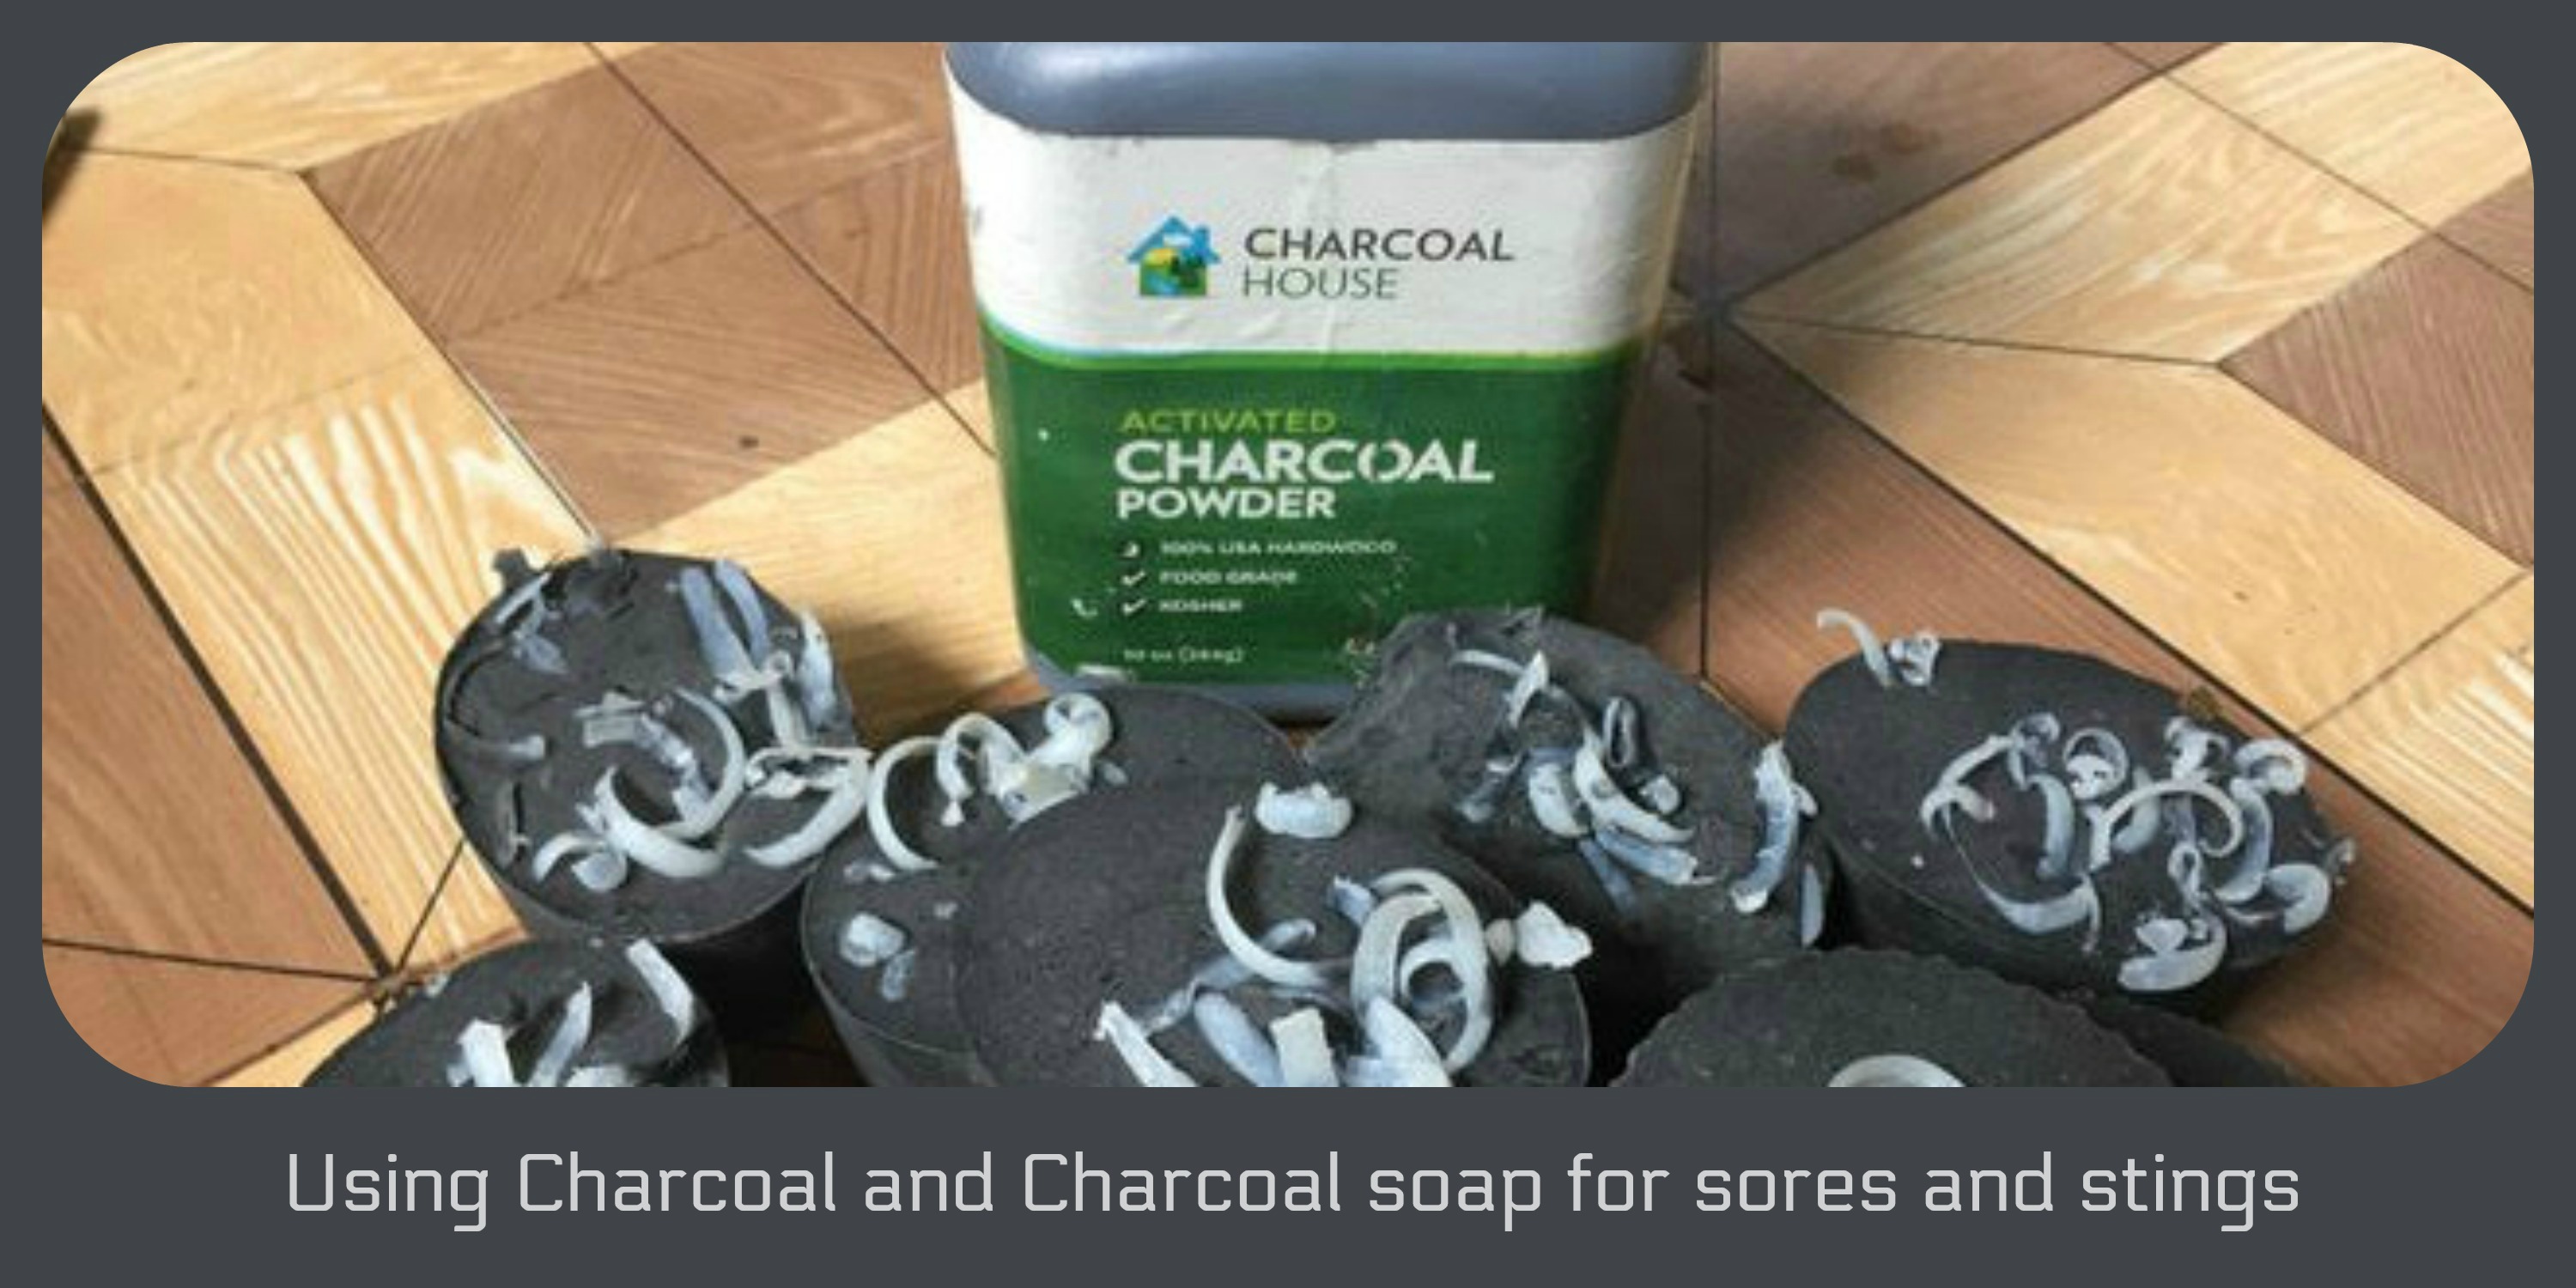 Using Charcoal and Charcoal soap for sores and stings - Charcoal and Charcoal soap for sores and stings